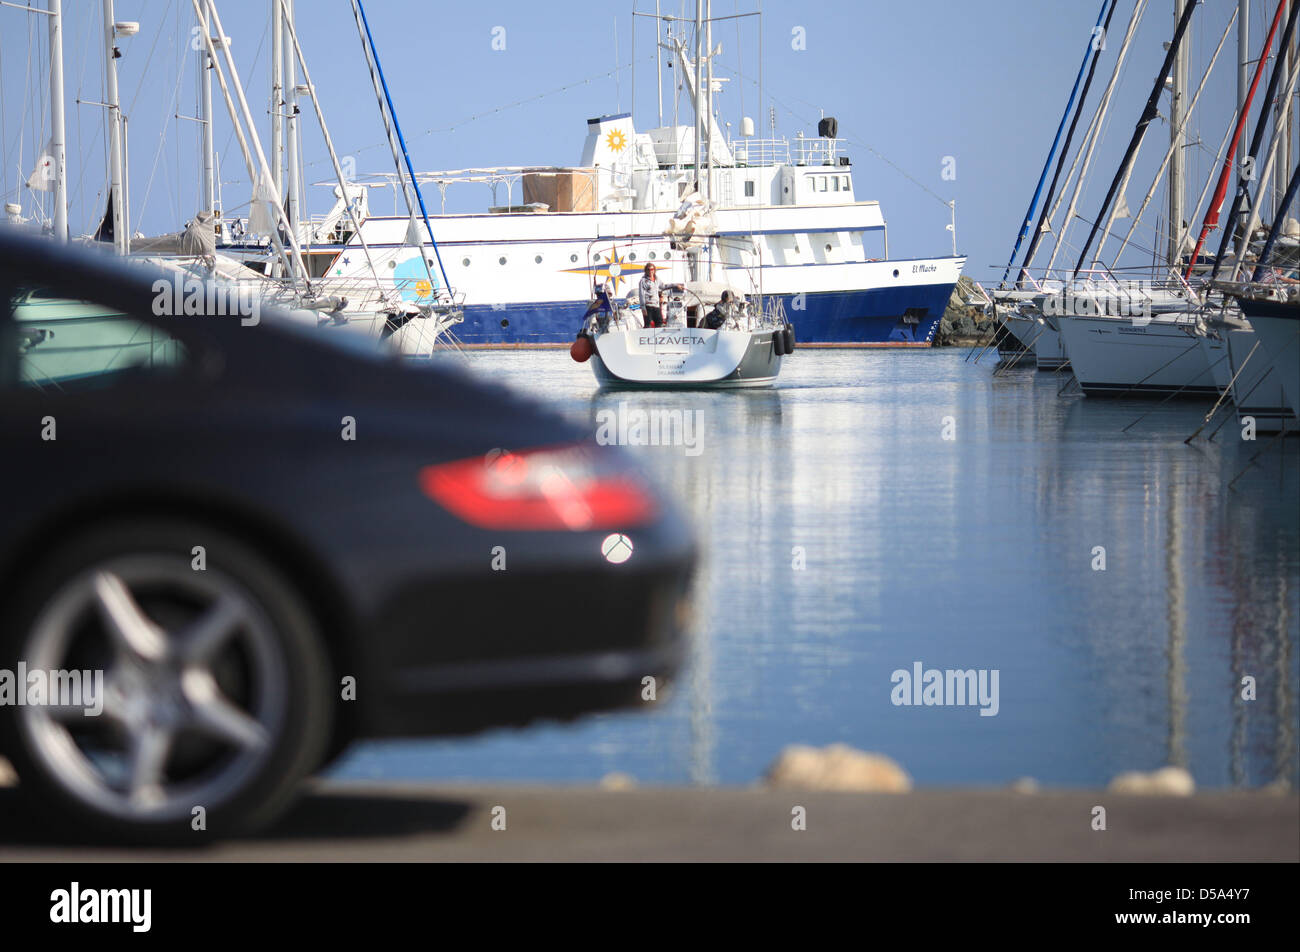 View of luxury cars and yachts at a private marina in Limassol, Cyprus, 24 March 2013. Photo: Florian Schuh Stock Photo